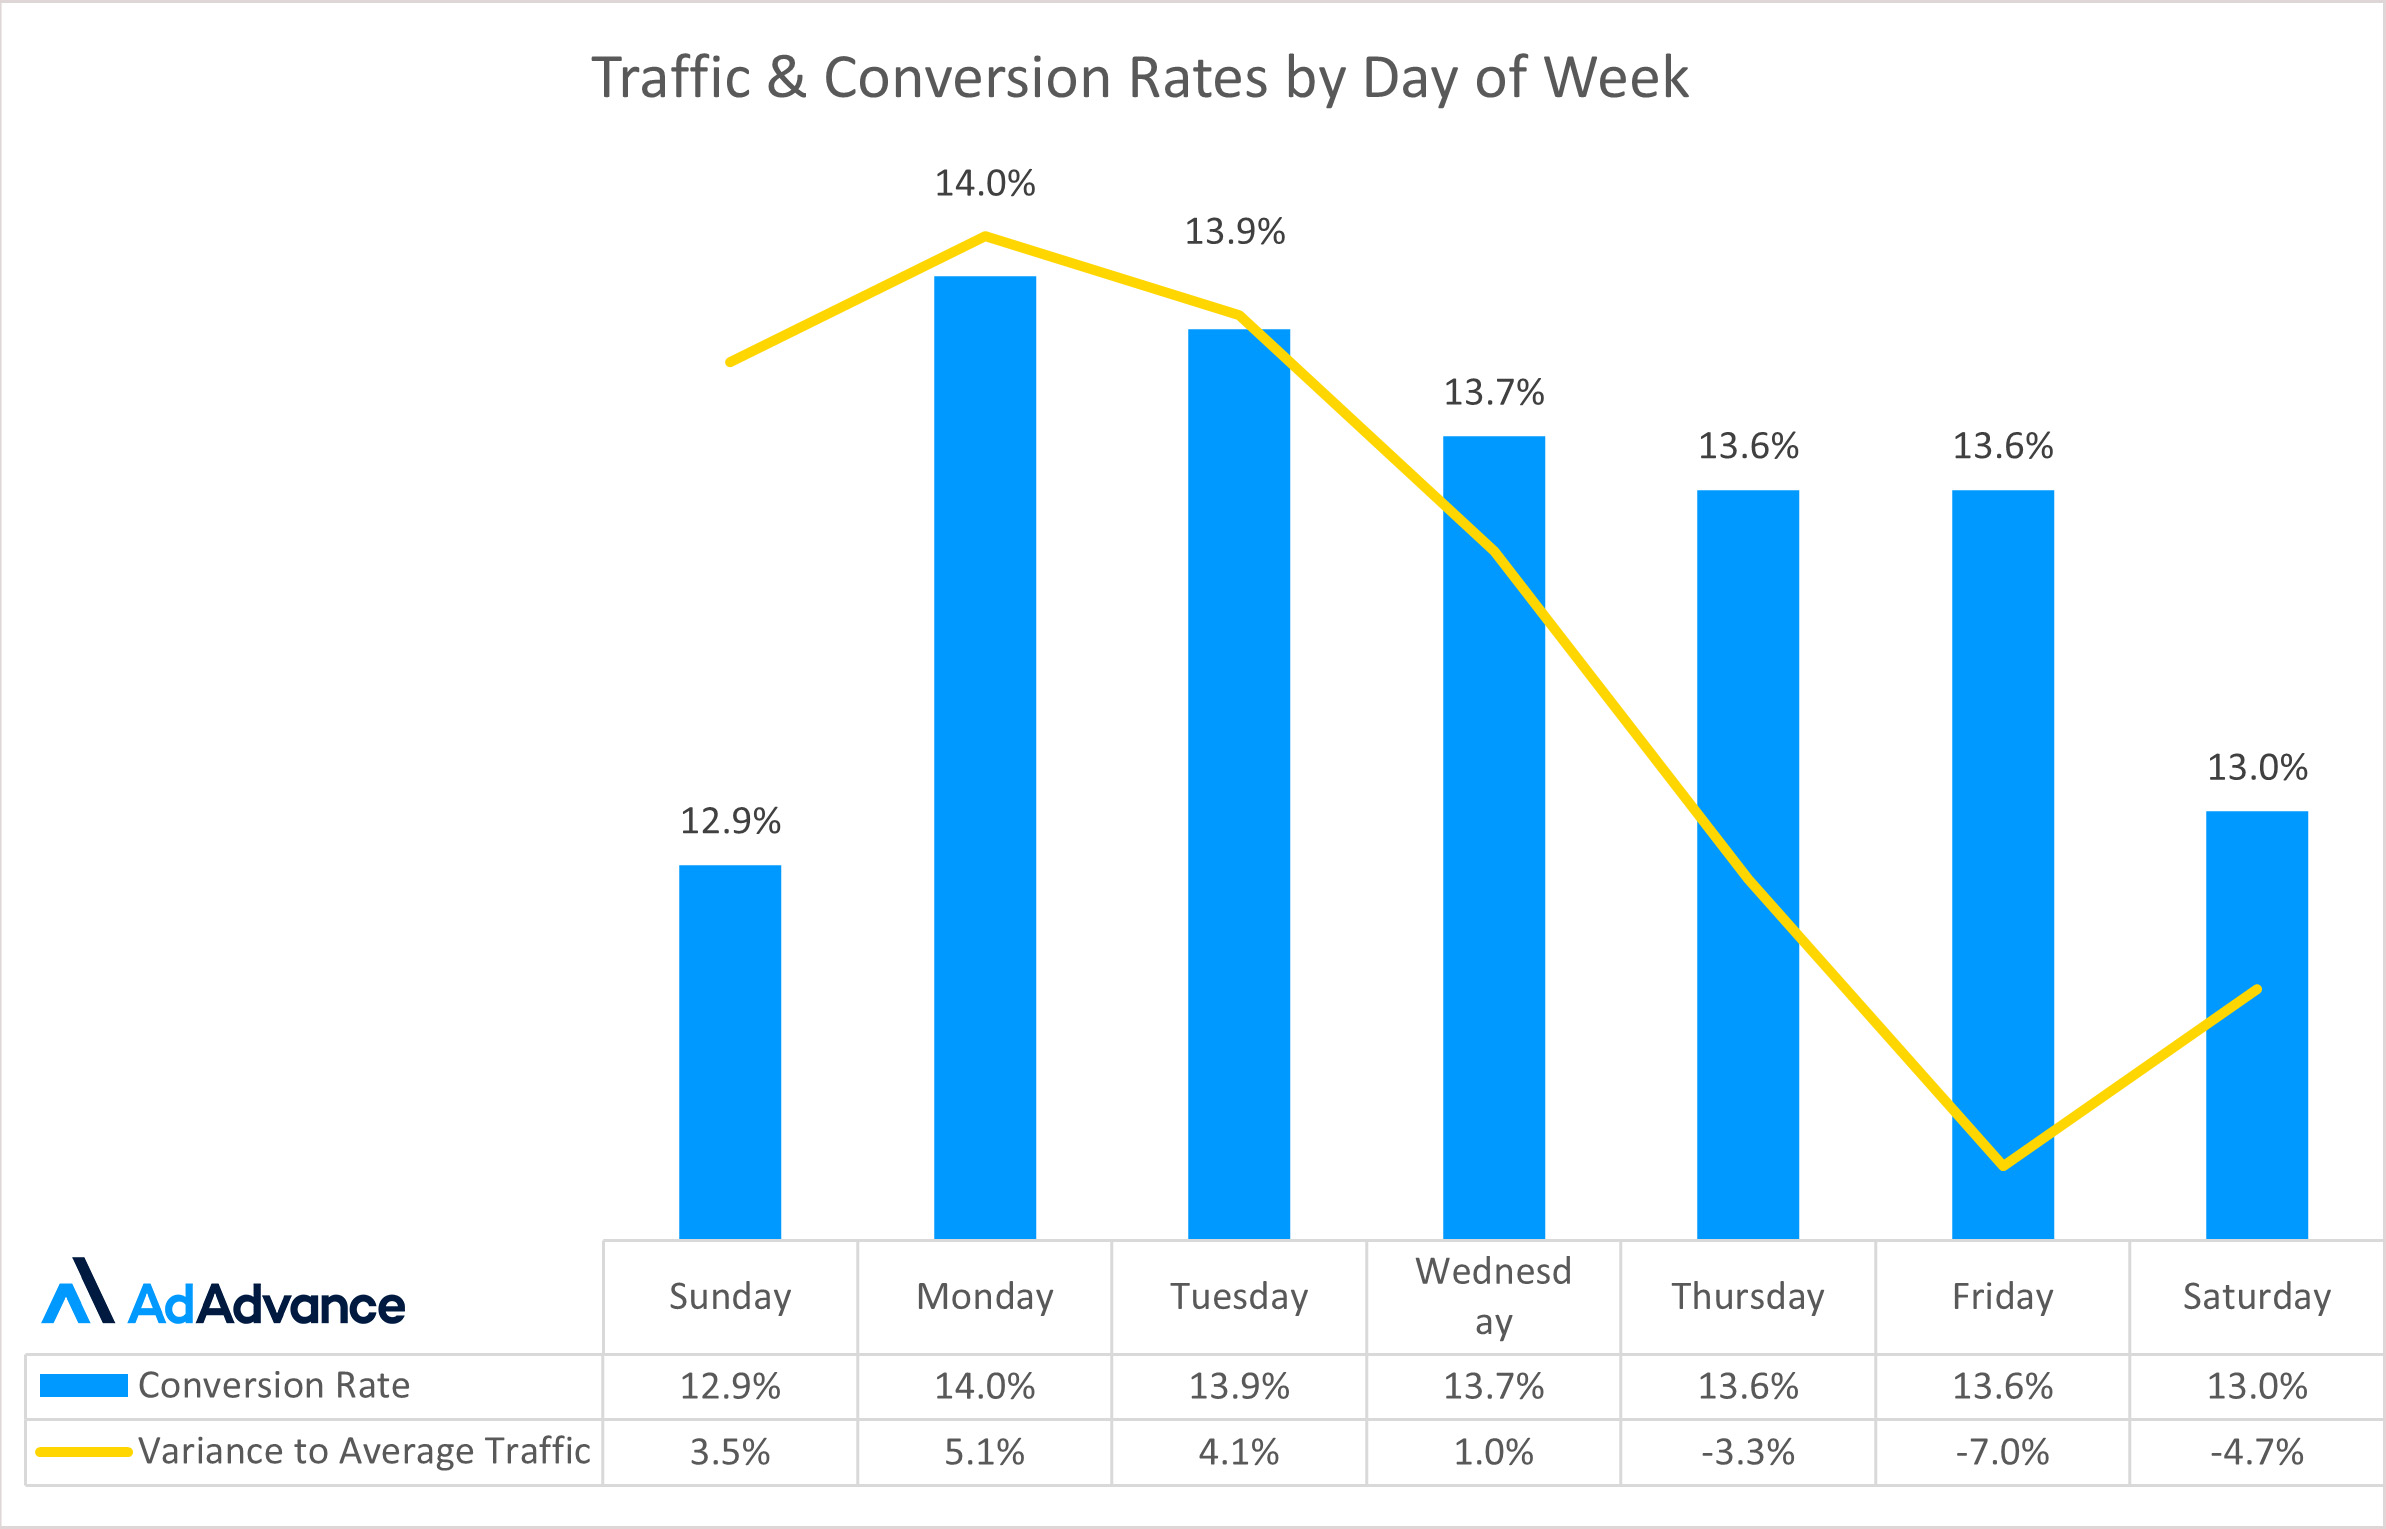 same-day delivery - Reports, Statistics & Marketing Trends